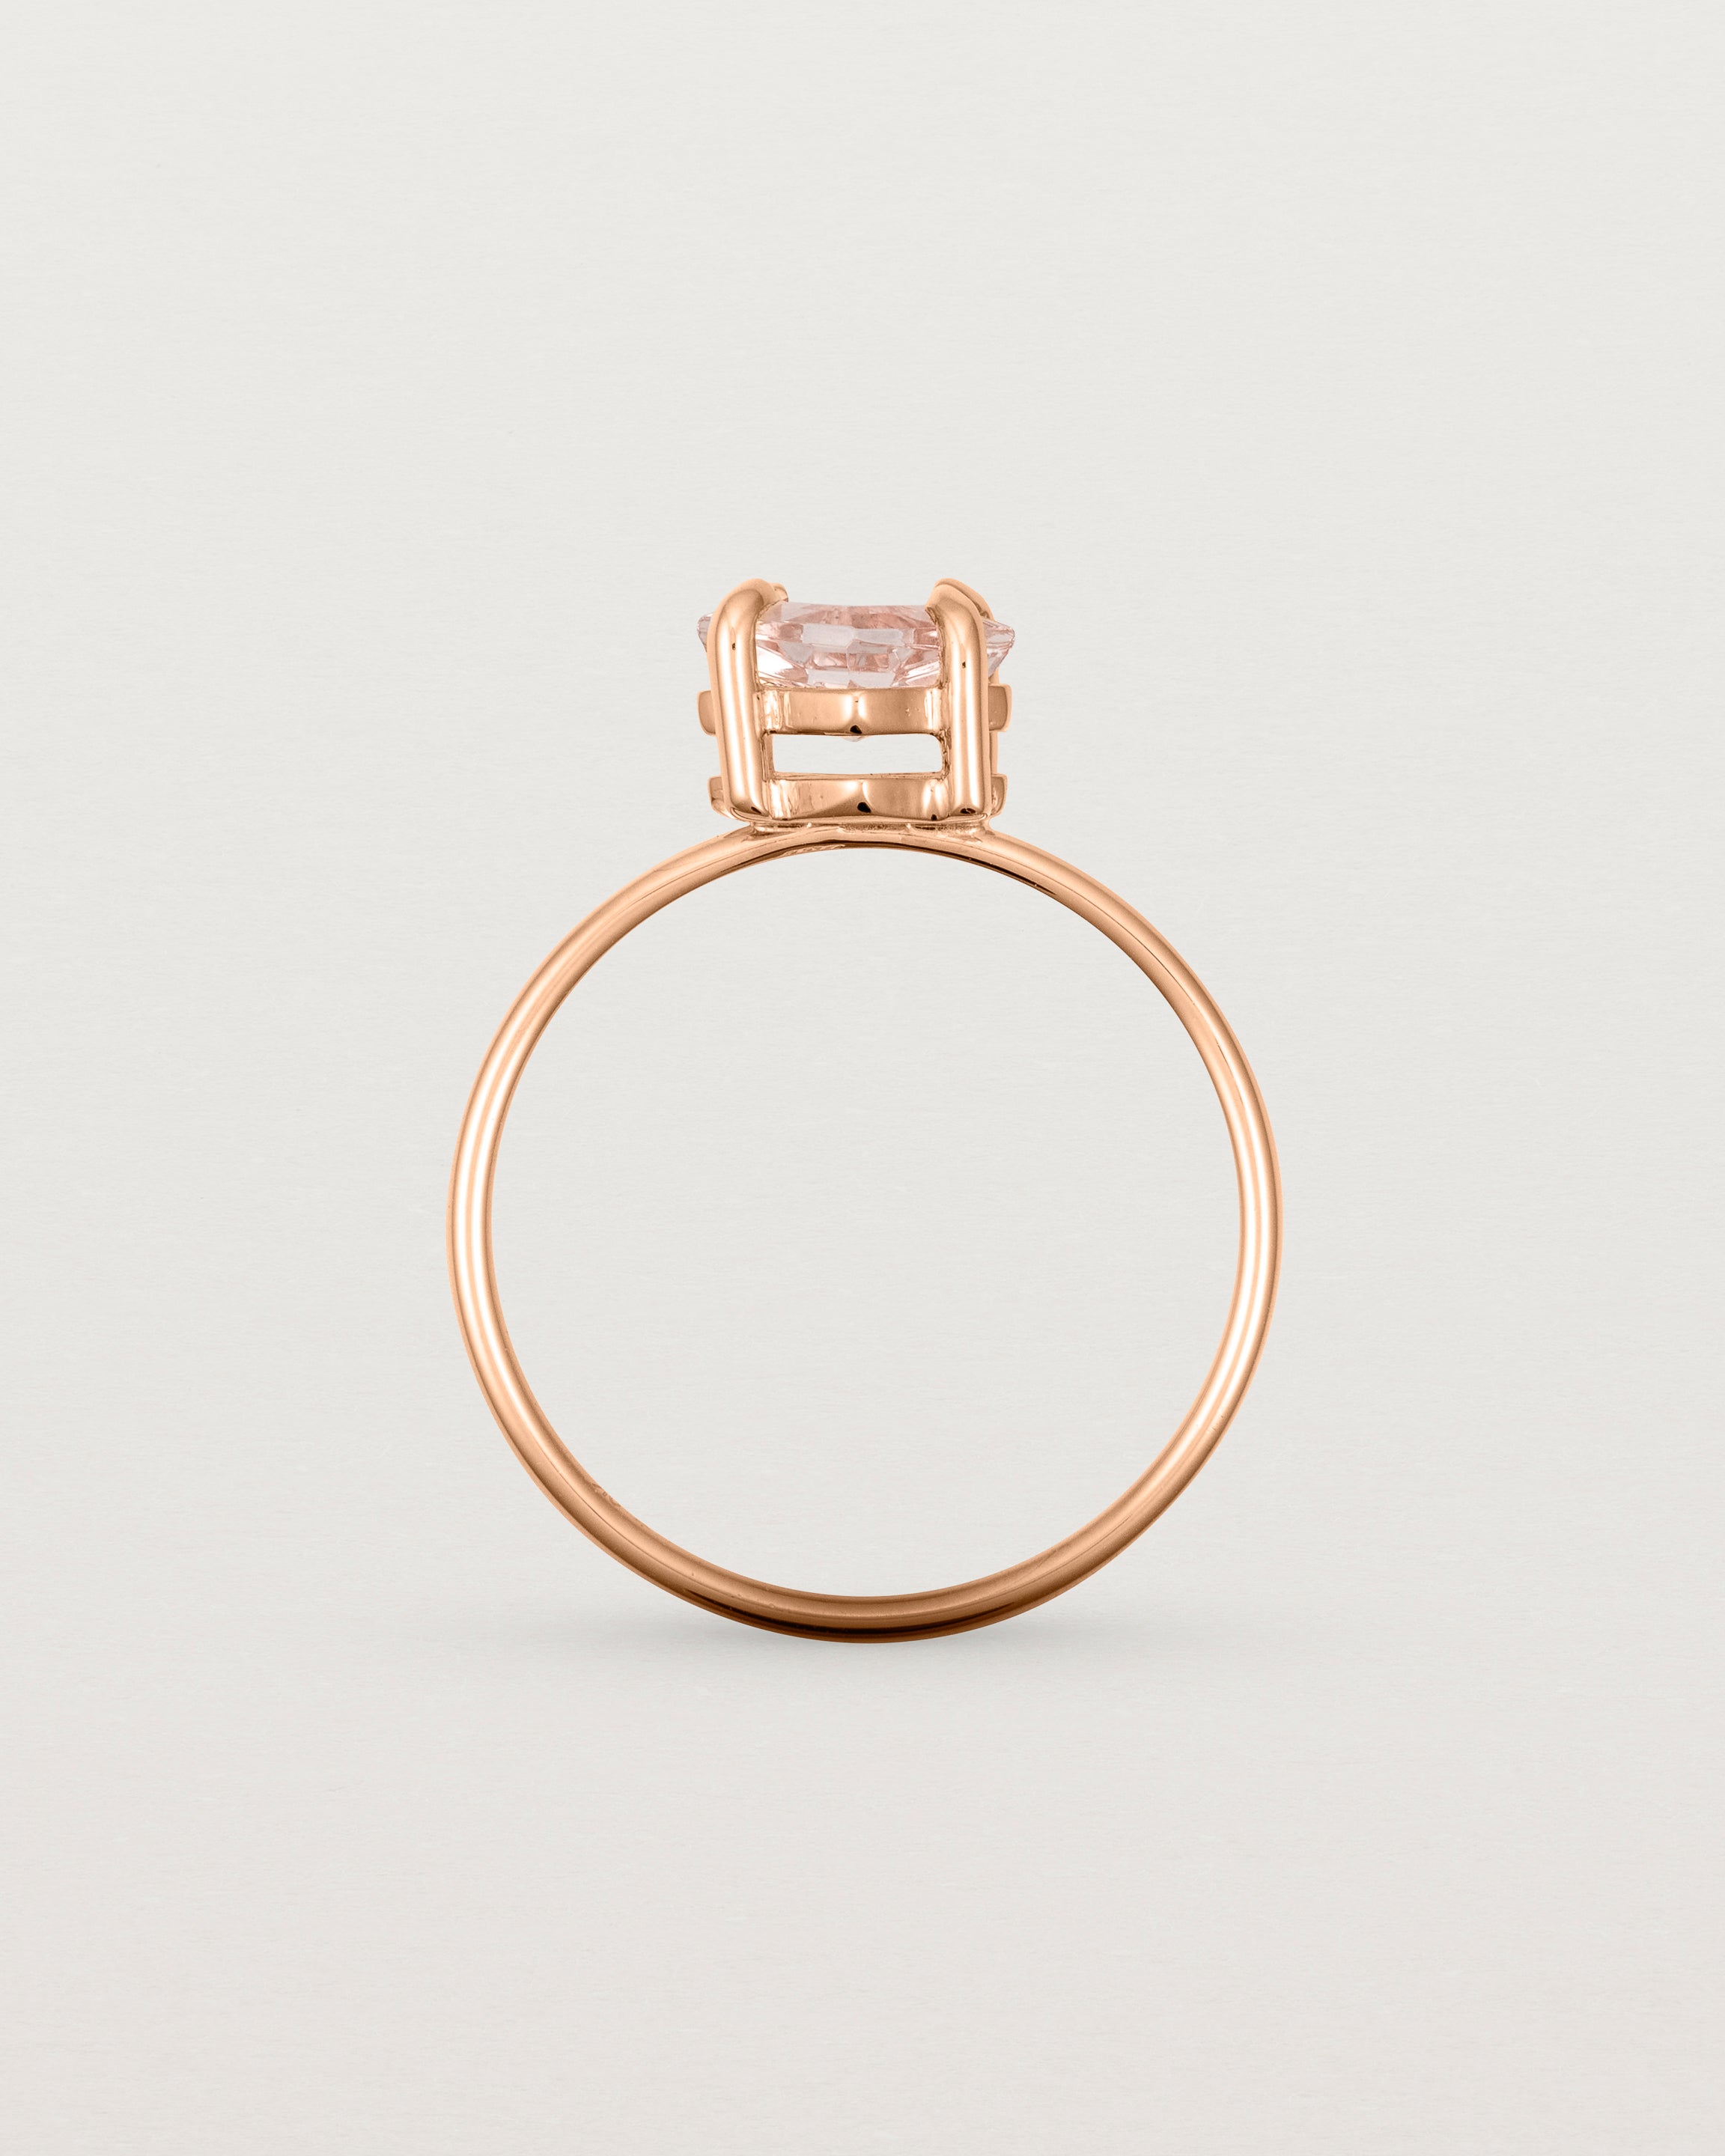 Standing view of the Mai Ring | Savannah Sunstone in Rose Gold.